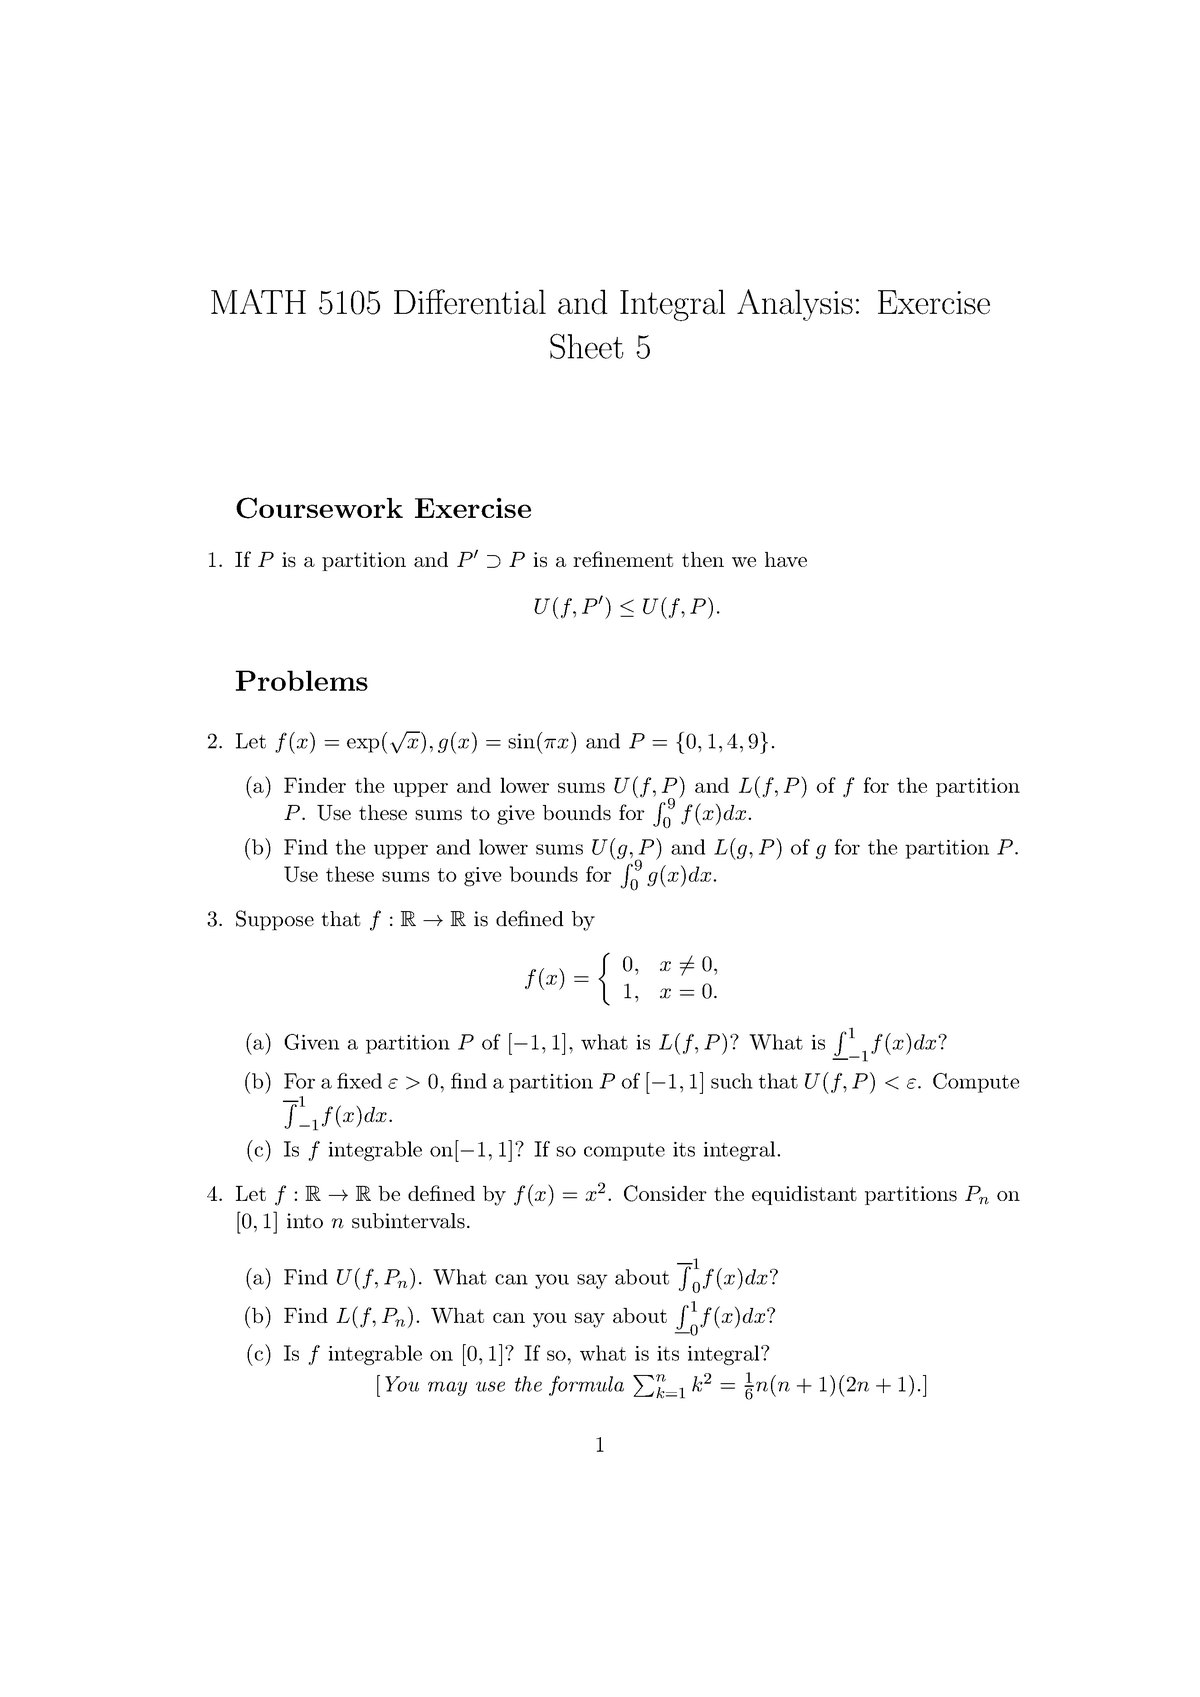 Course Worksheet 5 Differential And Integral Analysis Studocu